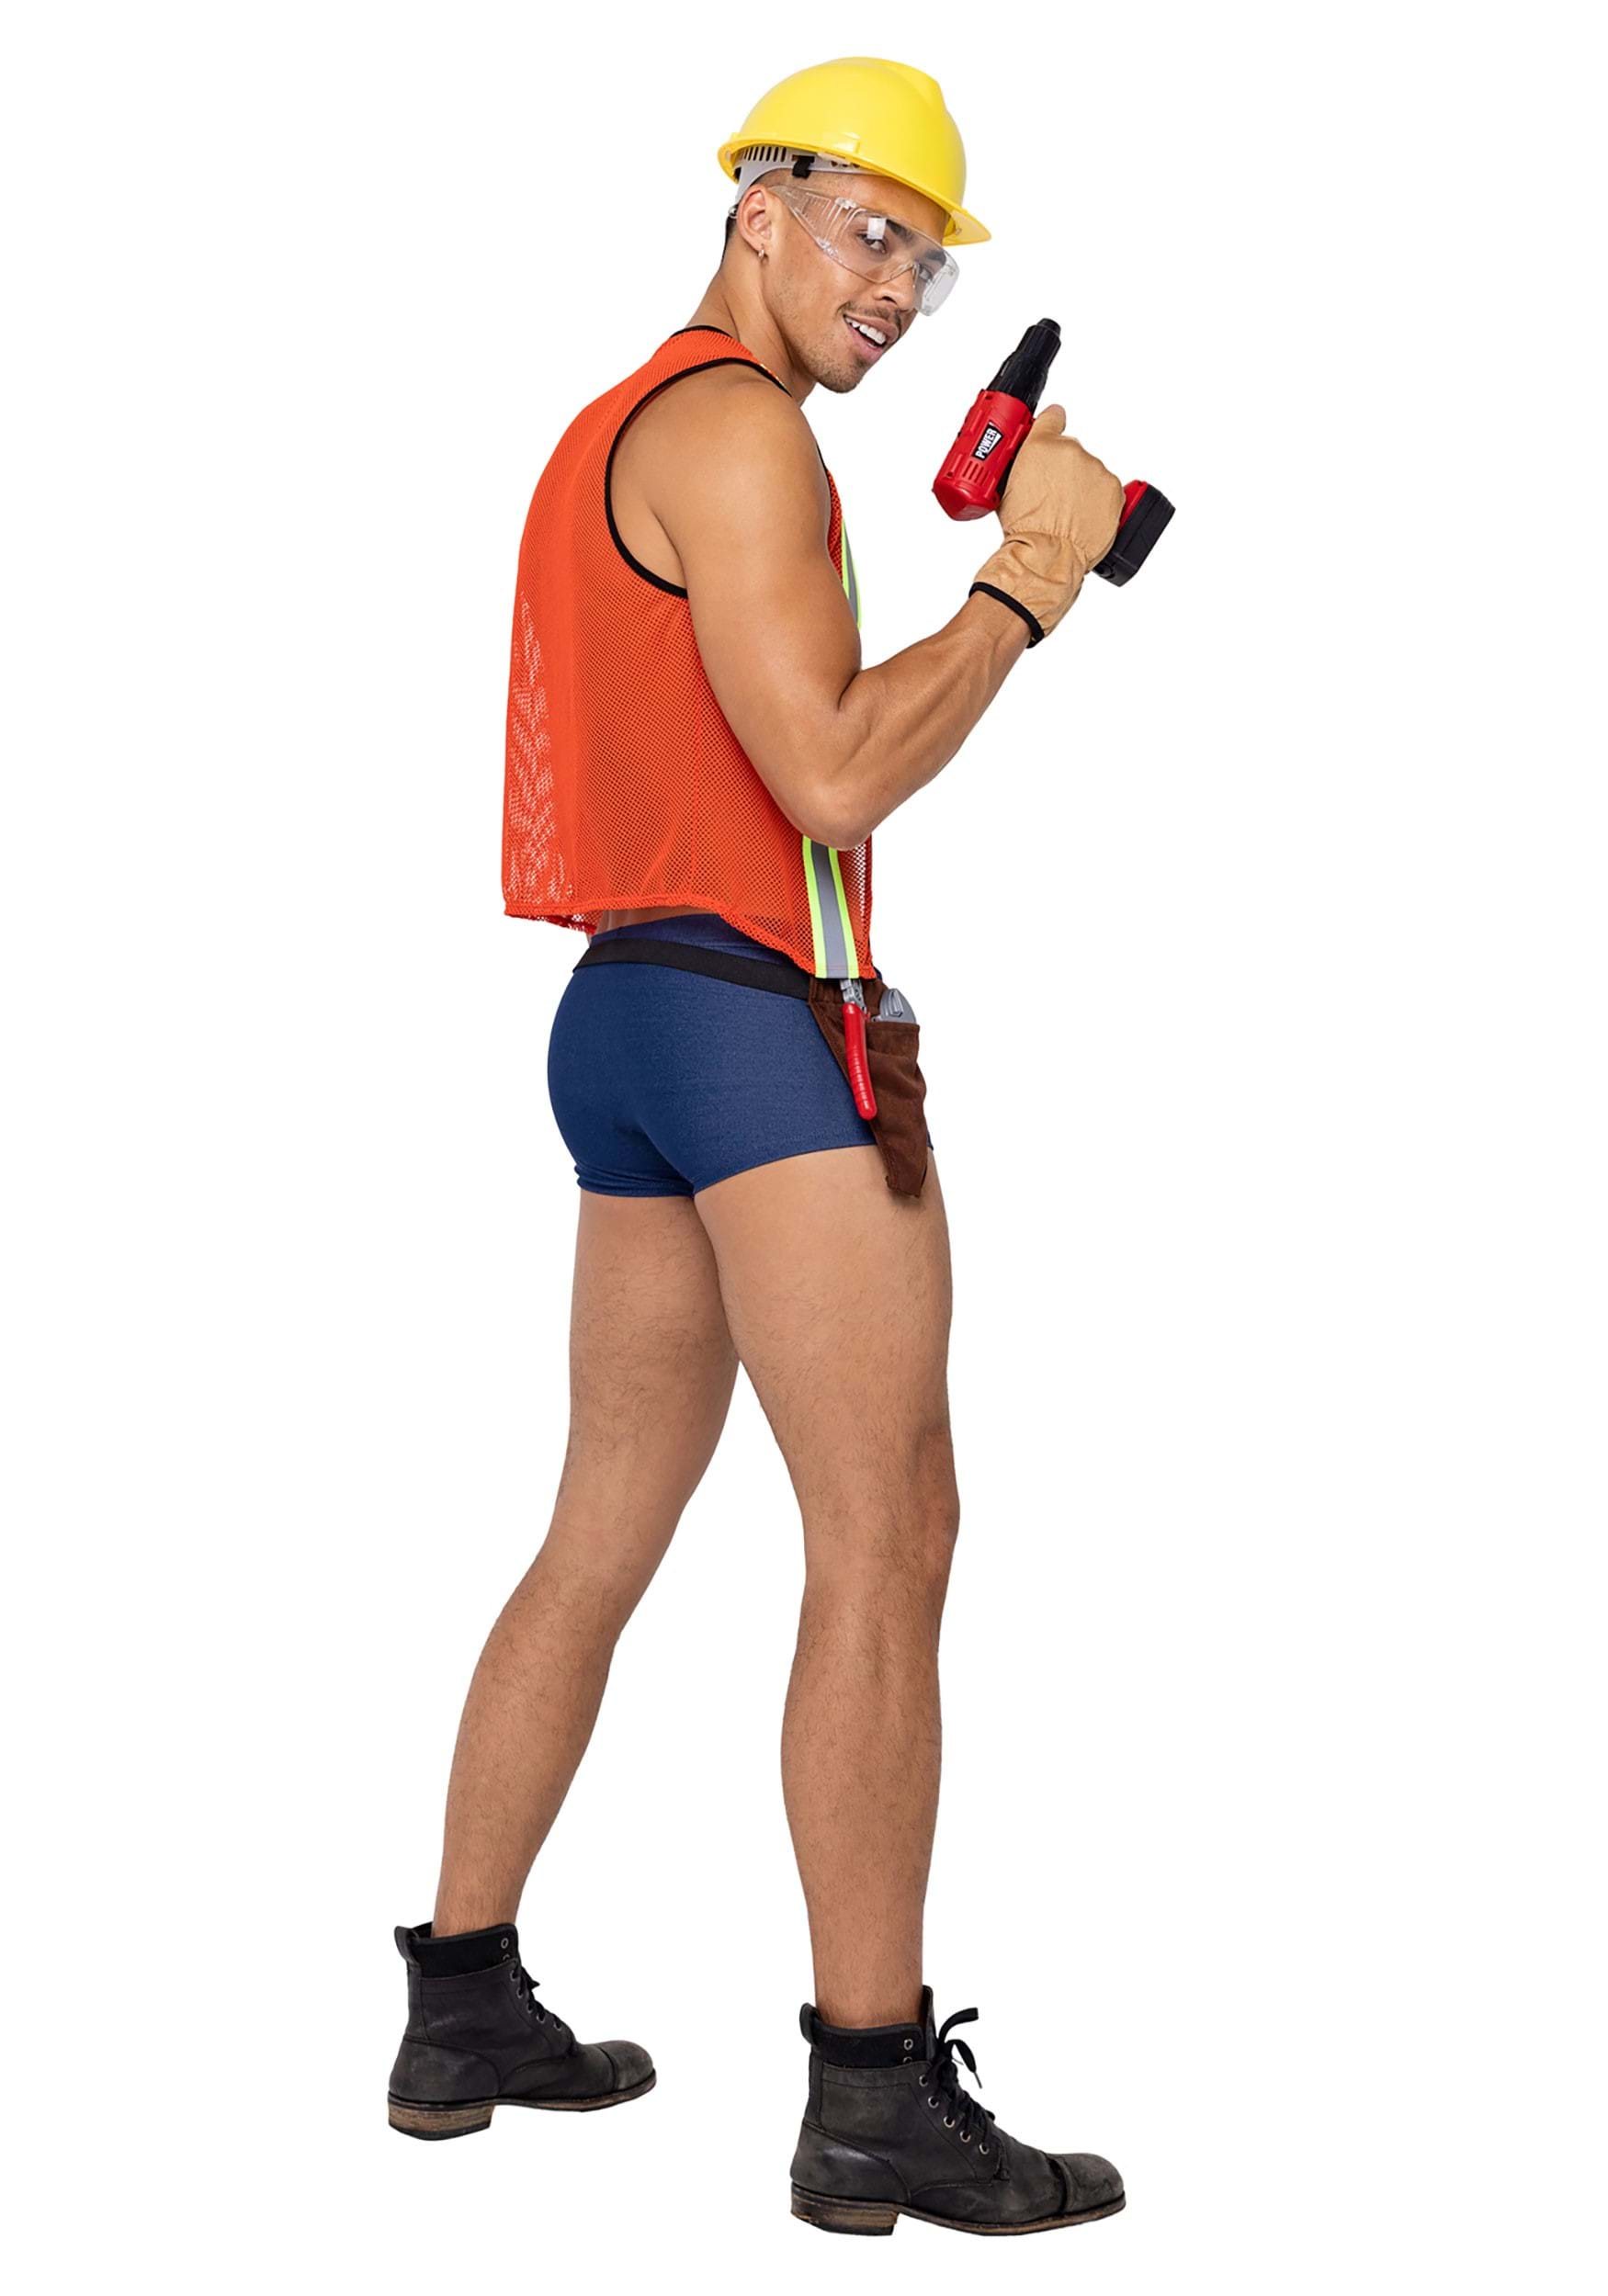 Men’s Sexy Construction Hard Worker Costume , Sexy Men's Costumes